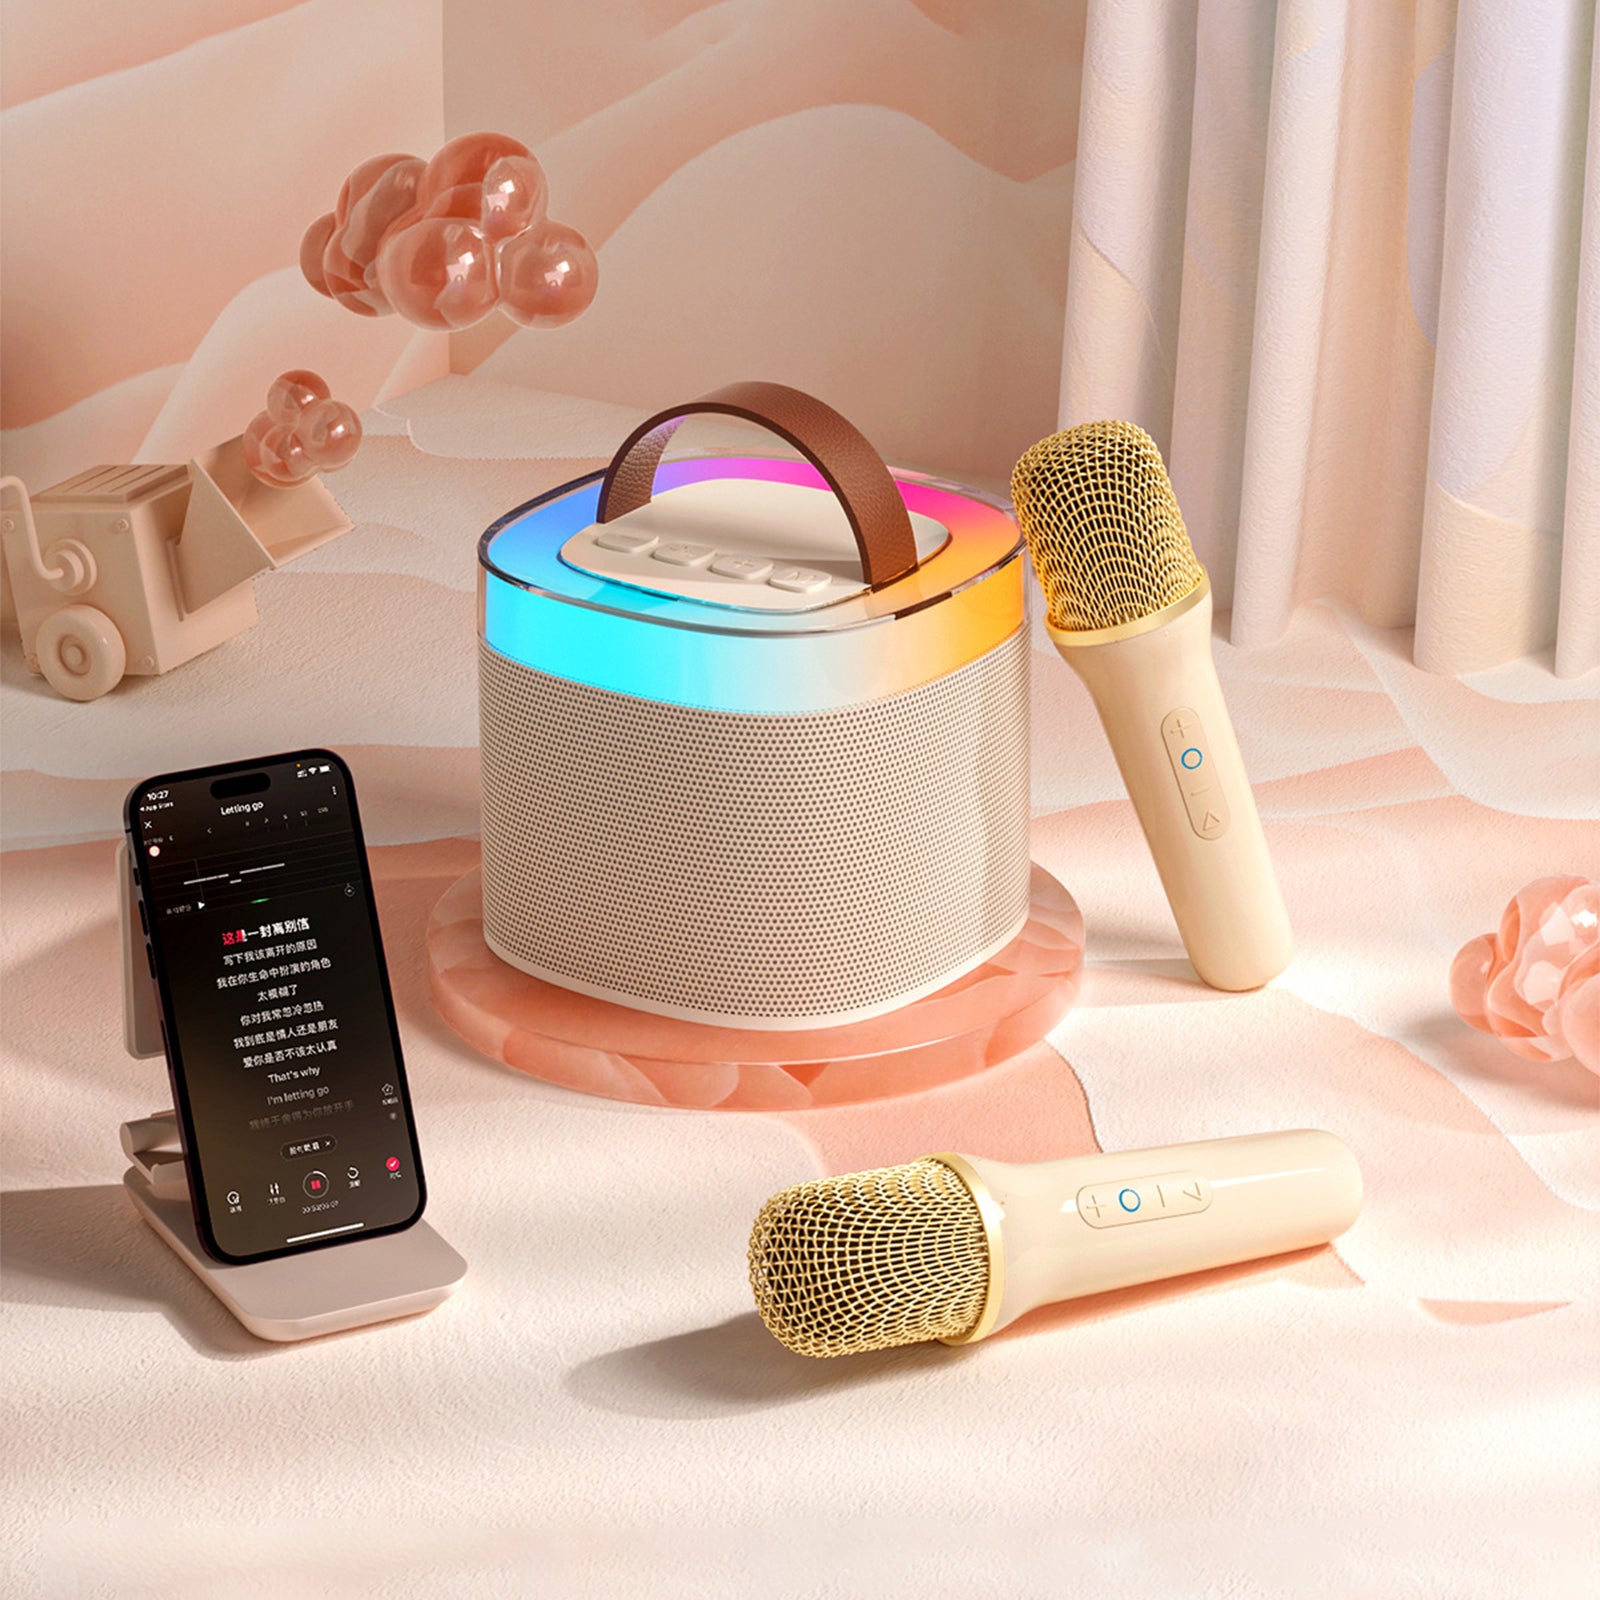 Mini Karaoke Machine: Portable Bluetooth Speaker with Wireless Microphones and Party Lights